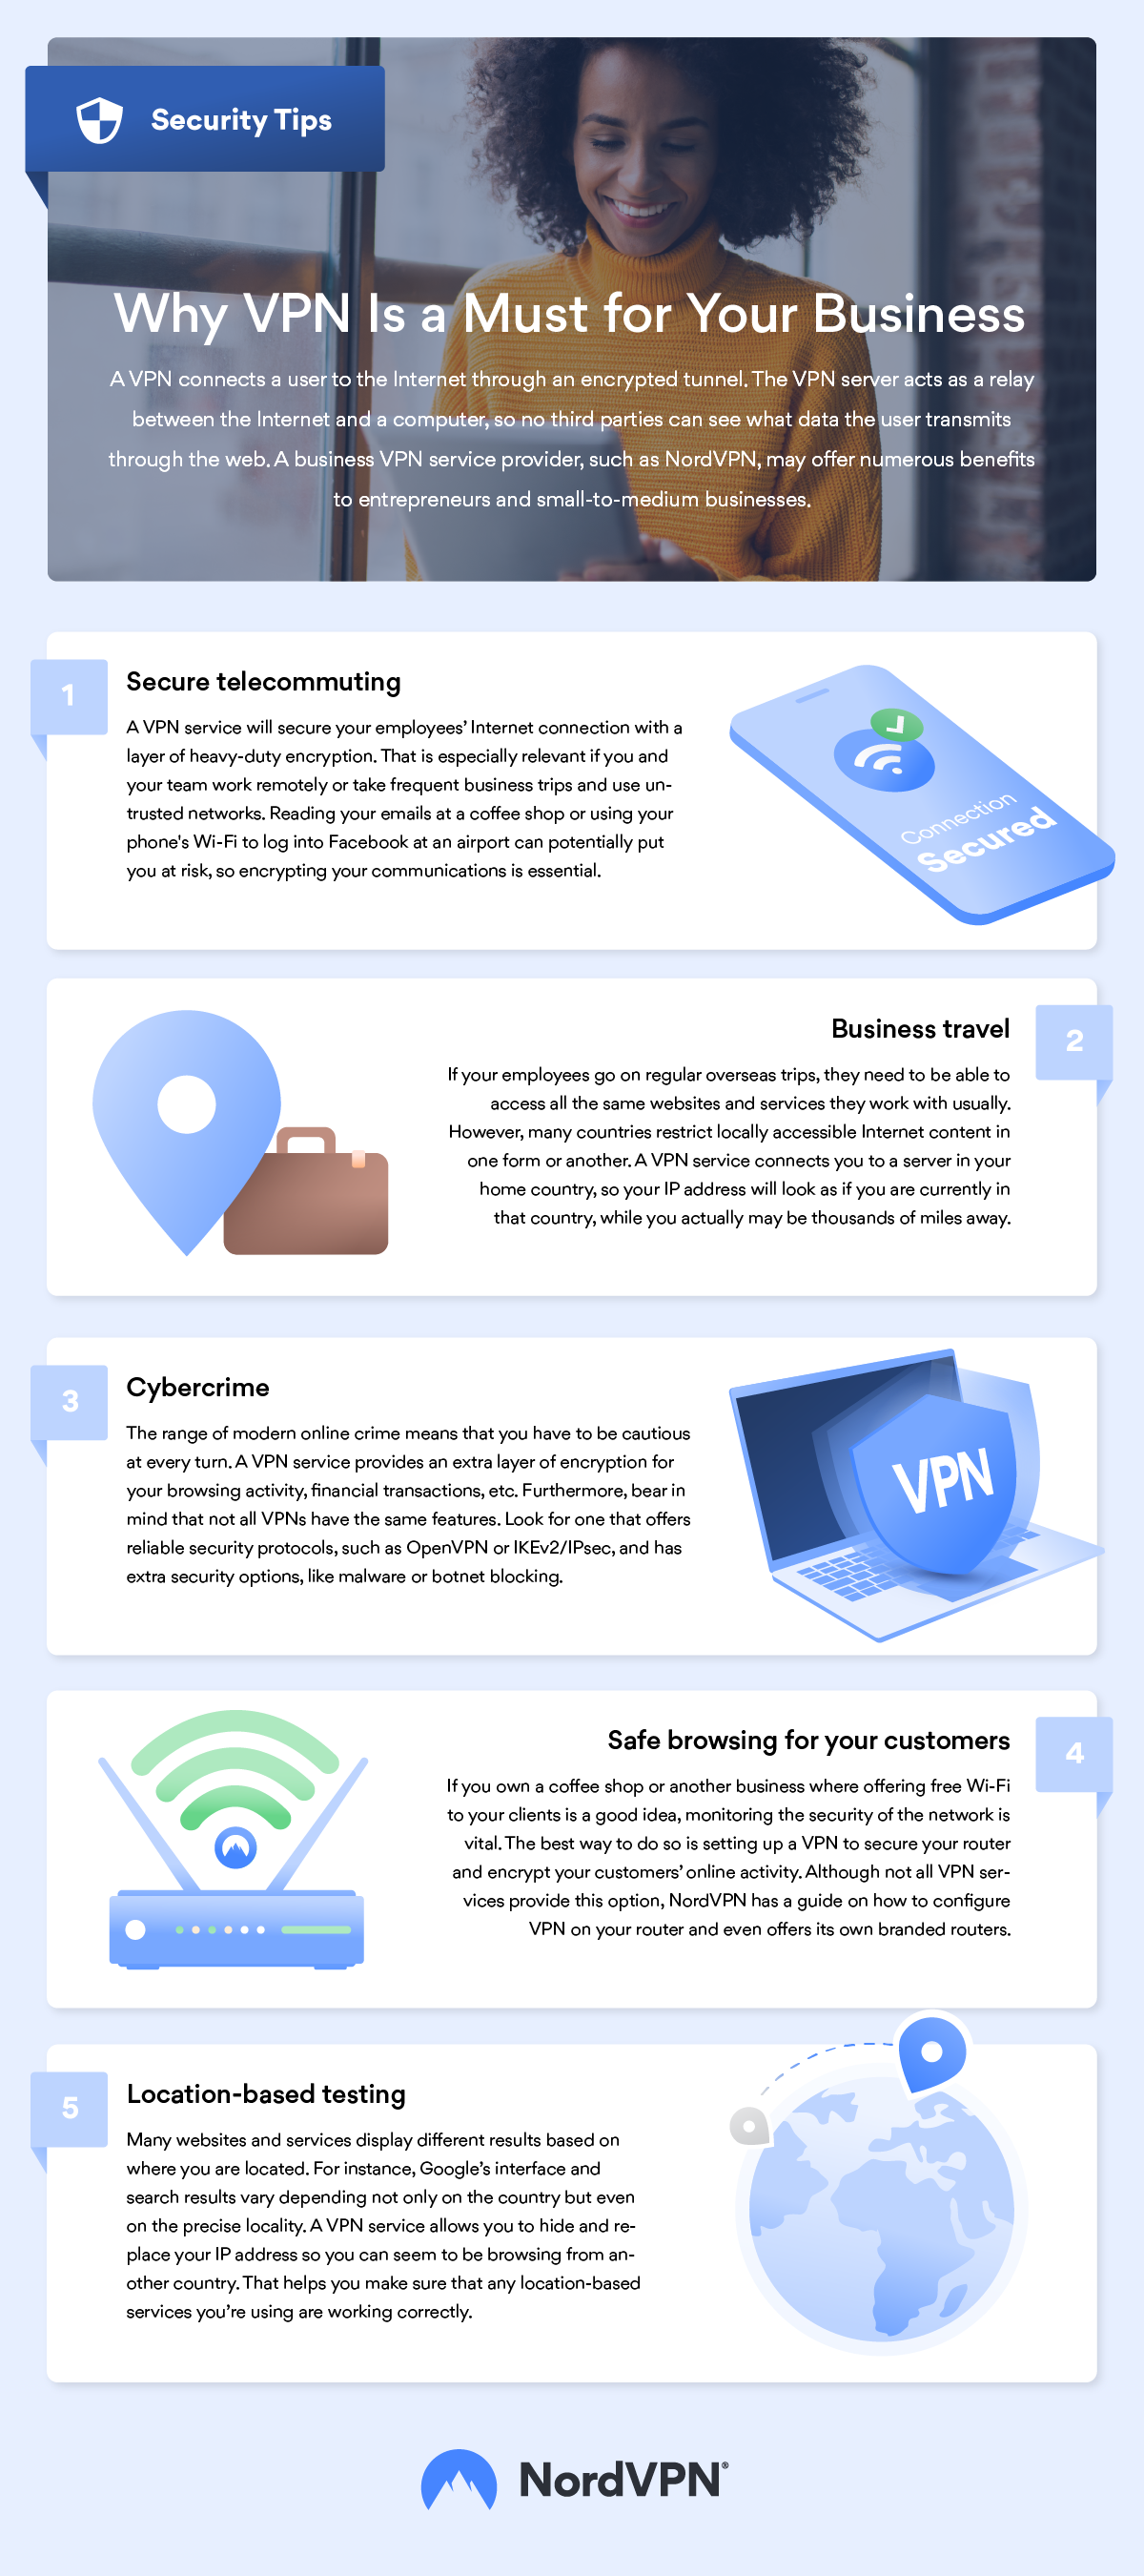 Security Tips-Why VPN Is a Must for Your Business